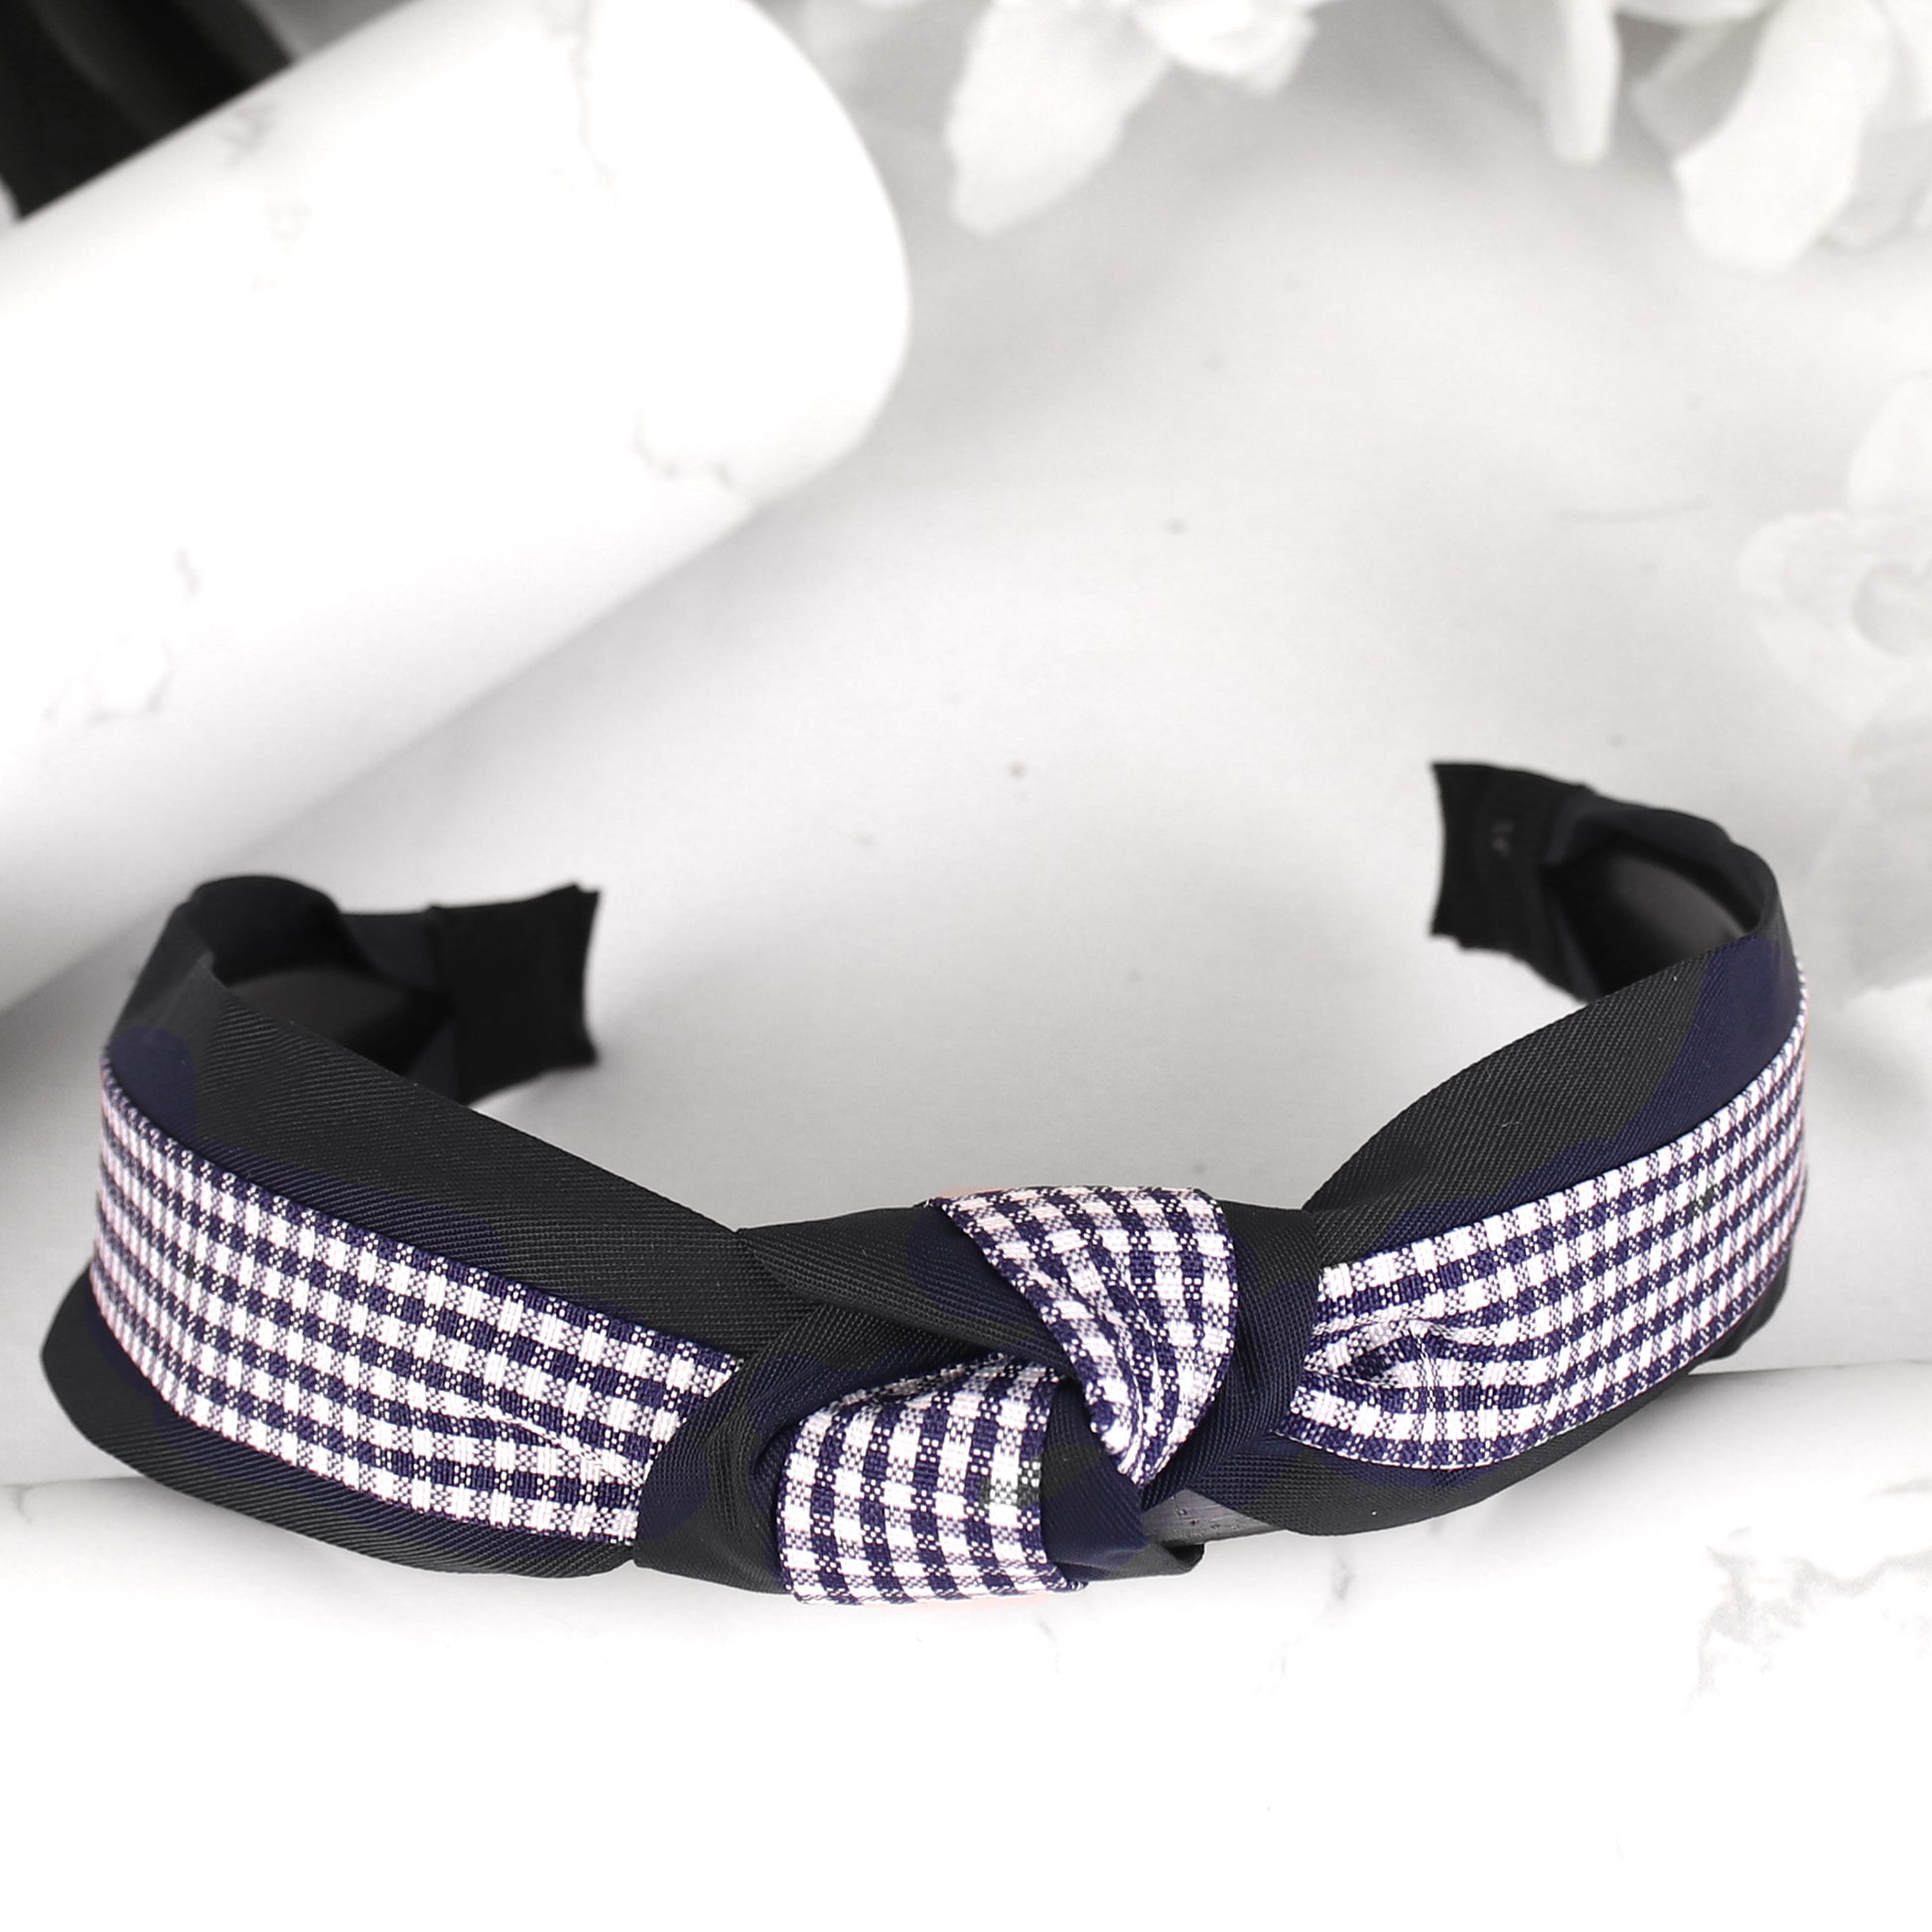 HairBand,Quirky Knot Hair Band in Blue - Cippele Multi Store